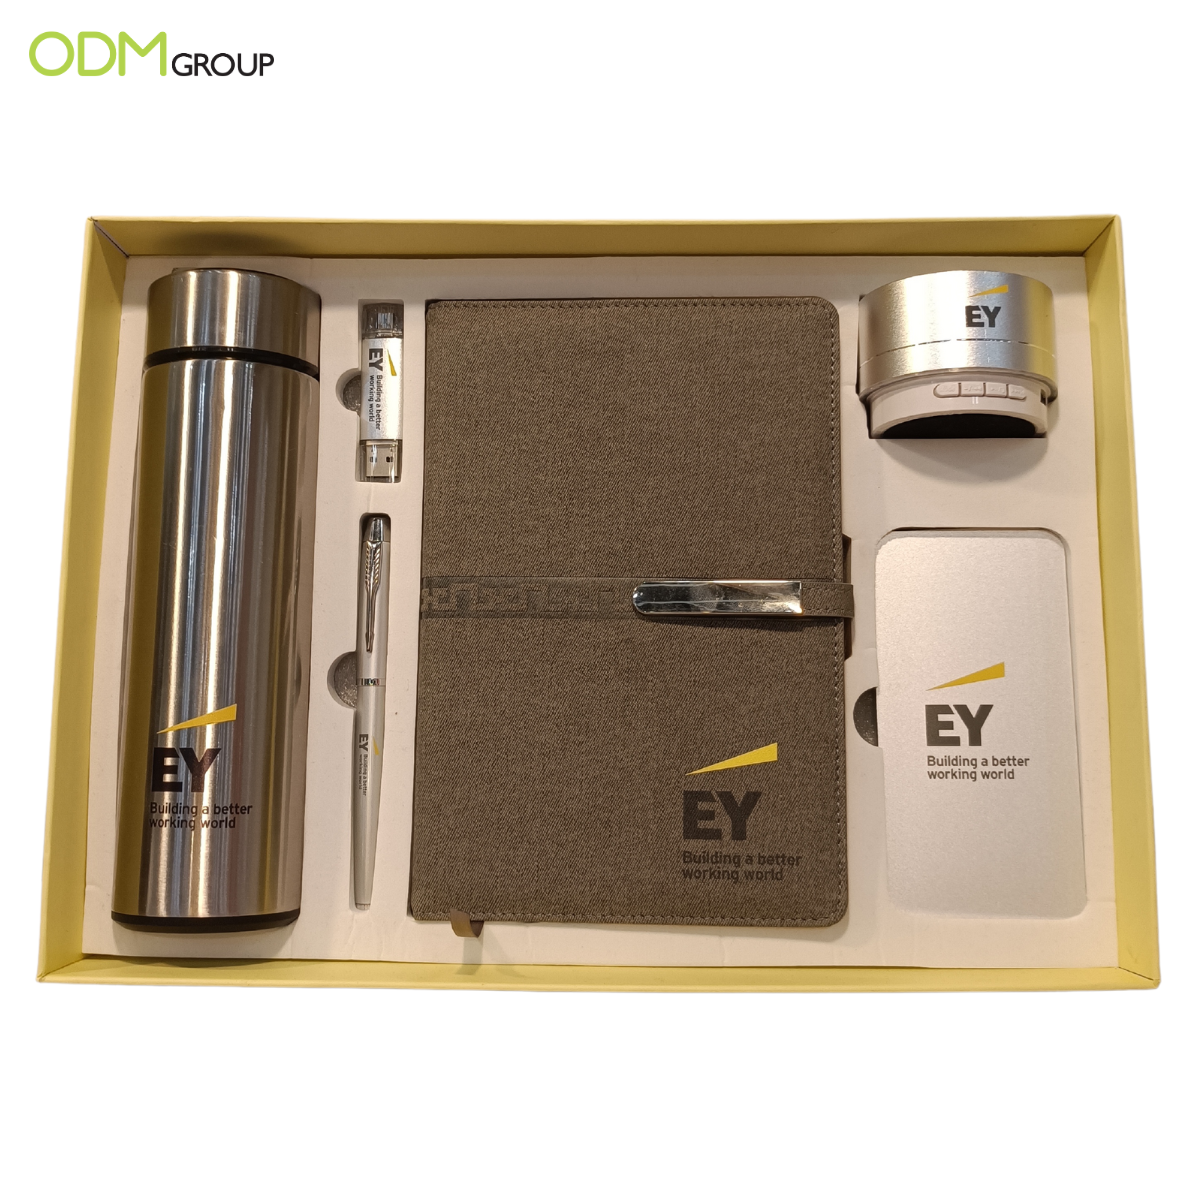 Corporate branded gift set including a thermos, notebook, pen, USB, and Bluetooth speaker.